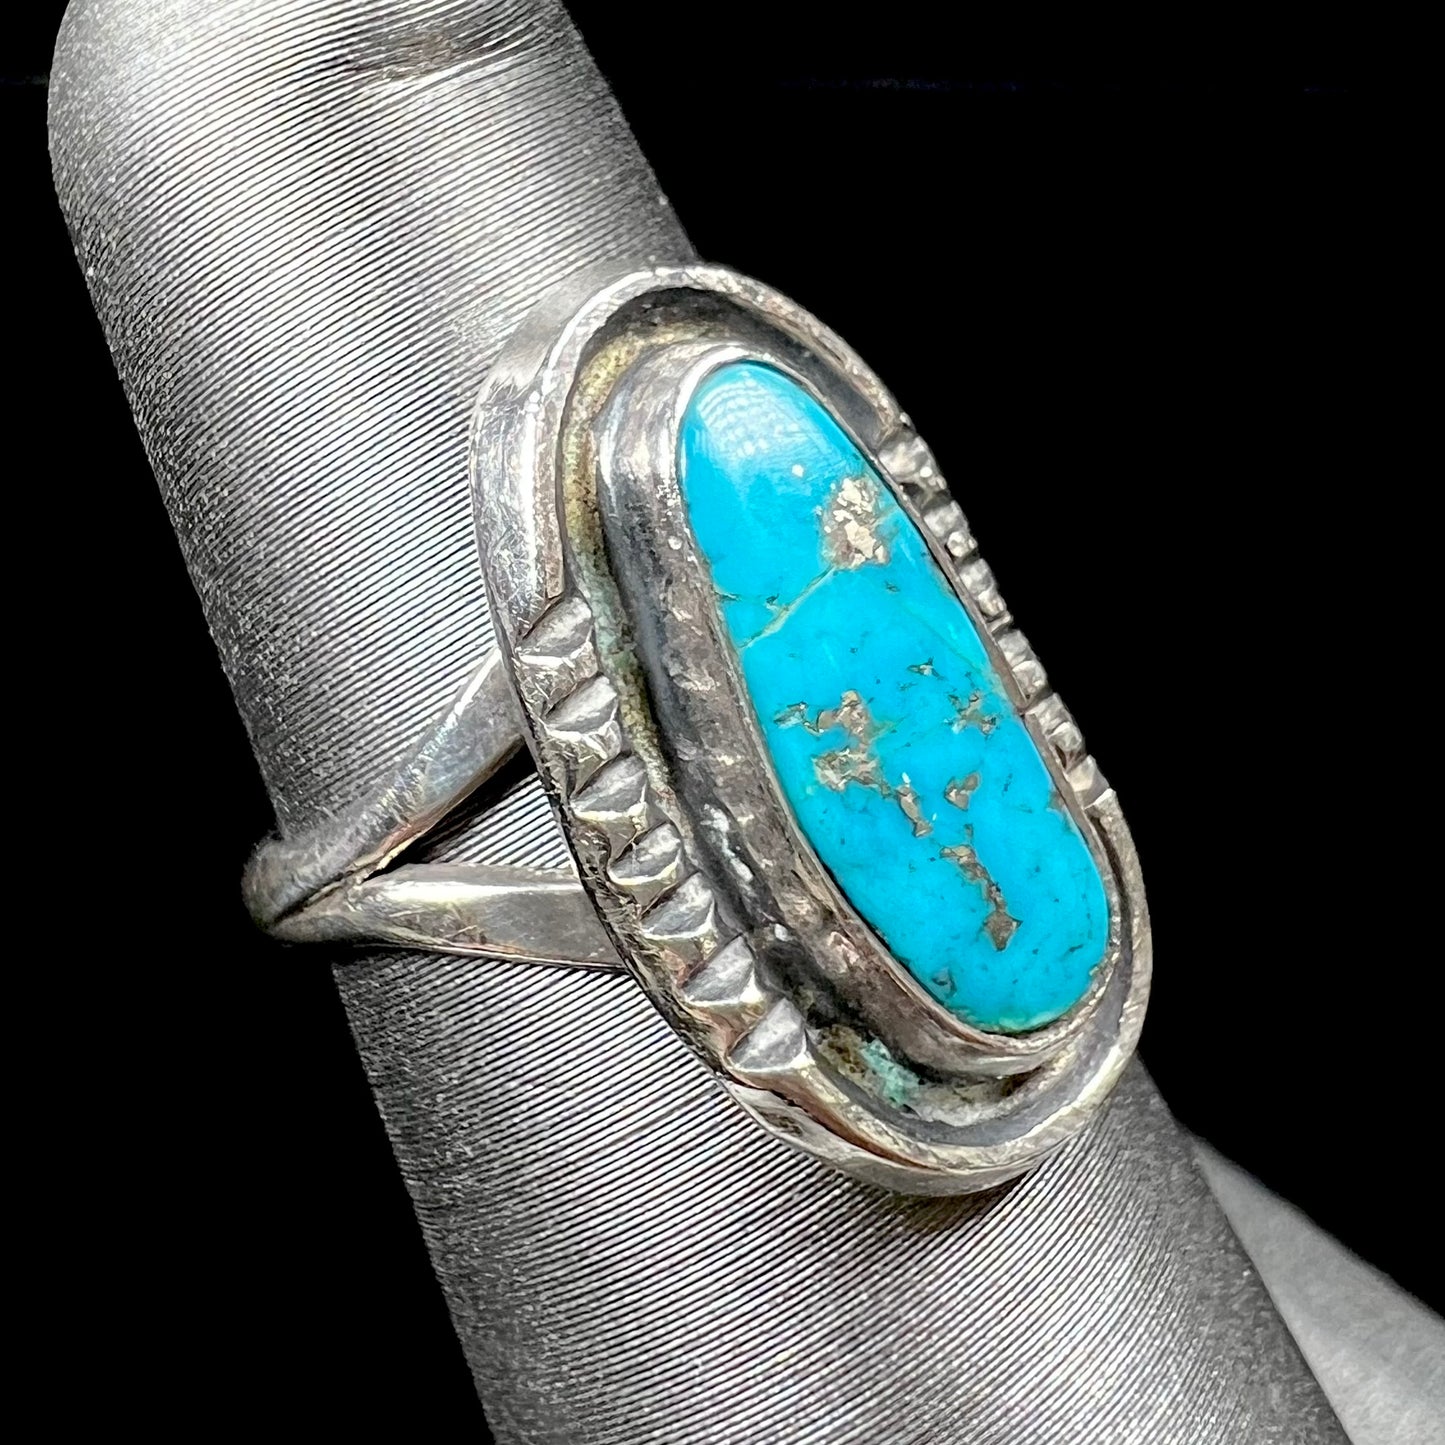 A handmade sterling silver Navajo style ring set with a Morenci turquoise stone.